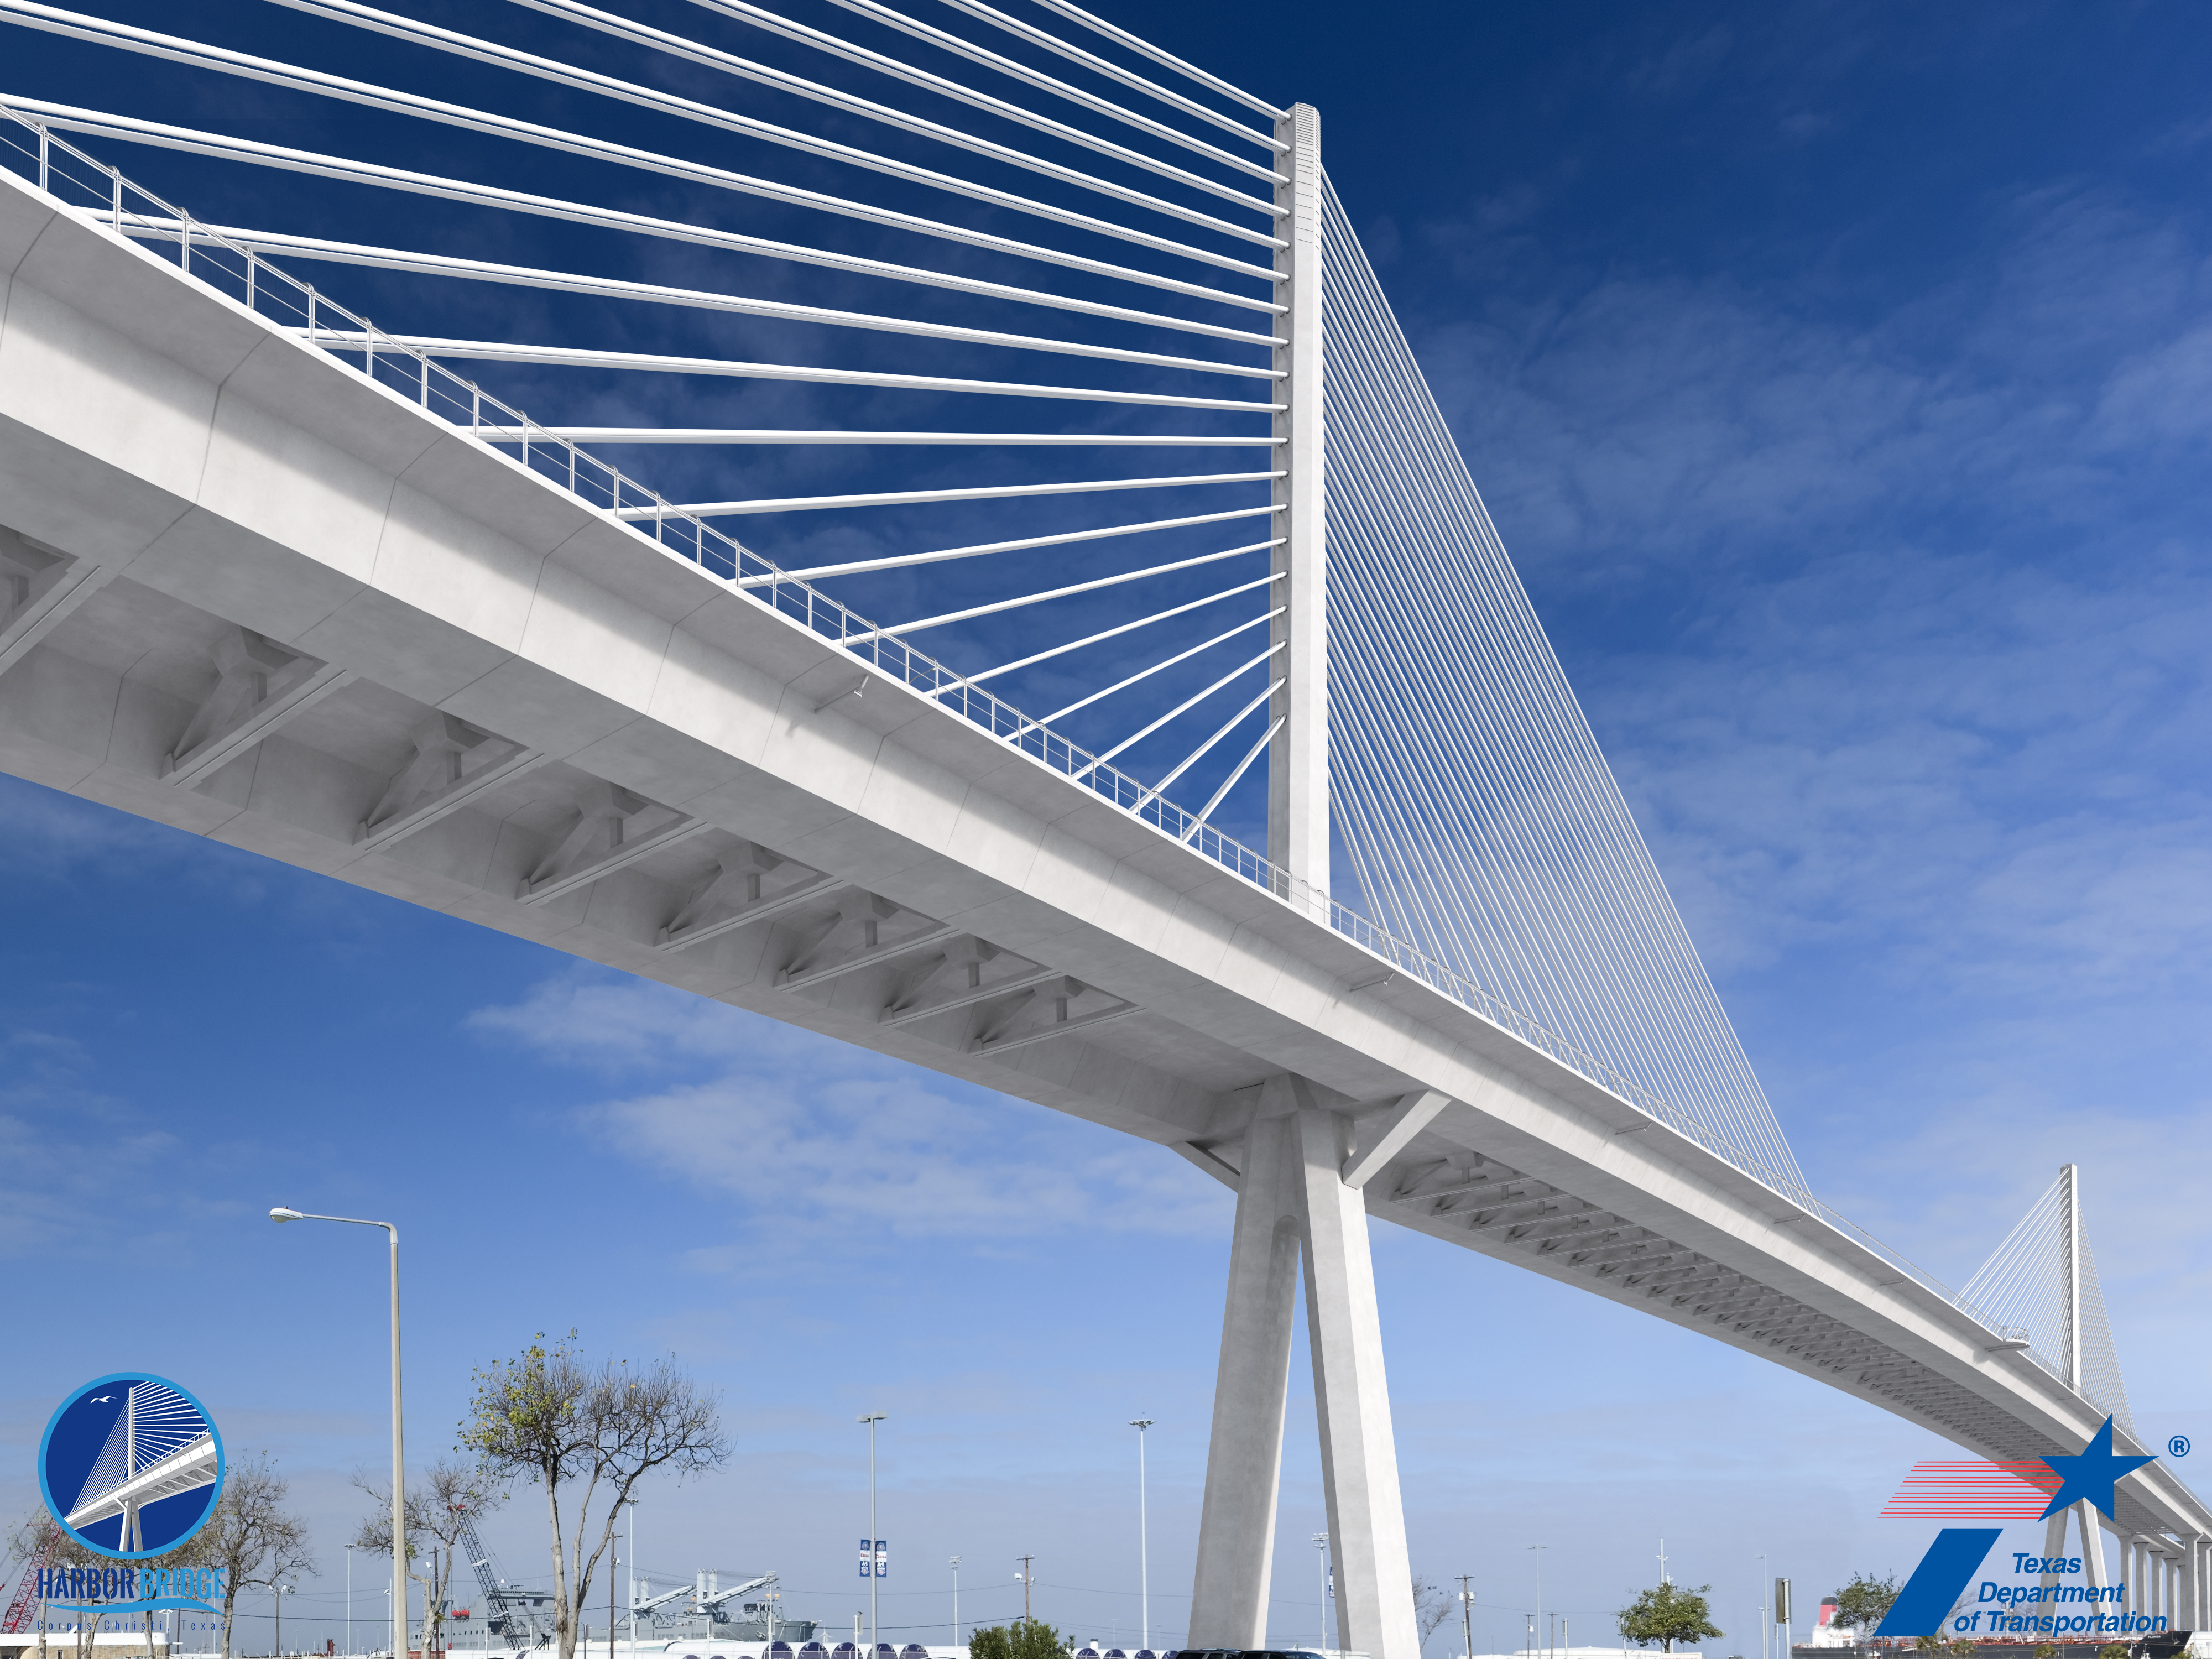 The design-build Harbor Bridge project includes replacement of the existing Harbor Bridge and reconstruction of portions of US 181, I-37 and the Crosstown Expressway